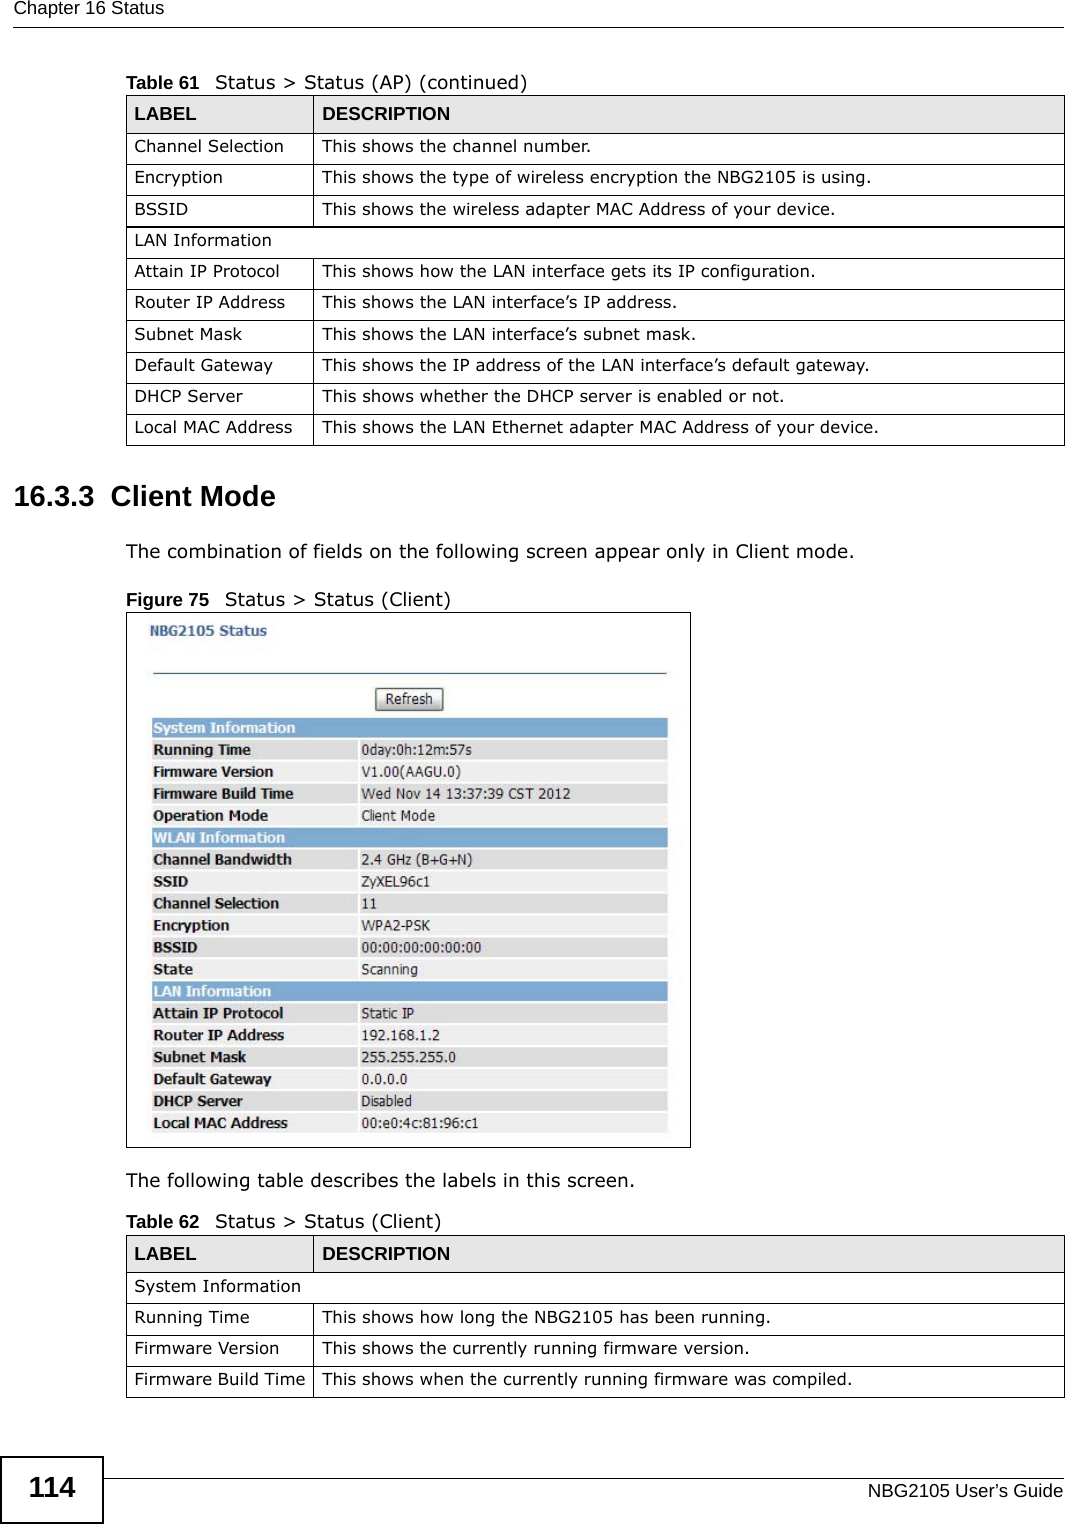 Chapter 16 StatusNBG2105 User’s Guide11416.3.3  Client ModeThe combination of fields on the following screen appear only in Client mode.Figure 75   Status &gt; Status (Client) The following table describes the labels in this screen.Channel Selection This shows the channel number.Encryption This shows the type of wireless encryption the NBG2105 is using.BSSID This shows the wireless adapter MAC Address of your device.LAN InformationAttain IP Protocol This shows how the LAN interface gets its IP configuration.Router IP Address This shows the LAN interface’s IP address.Subnet Mask This shows the LAN interface’s subnet mask.Default Gateway This shows the IP address of the LAN interface’s default gateway.DHCP Server This shows whether the DHCP server is enabled or not.Local MAC Address This shows the LAN Ethernet adapter MAC Address of your device.Table 61   Status &gt; Status (AP) (continued)LABEL DESCRIPTIONTable 62   Status &gt; Status (Client)LABEL DESCRIPTIONSystem InformationRunning Time This shows how long the NBG2105 has been running.Firmware Version This shows the currently running firmware version.Firmware Build Time This shows when the currently running firmware was compiled.